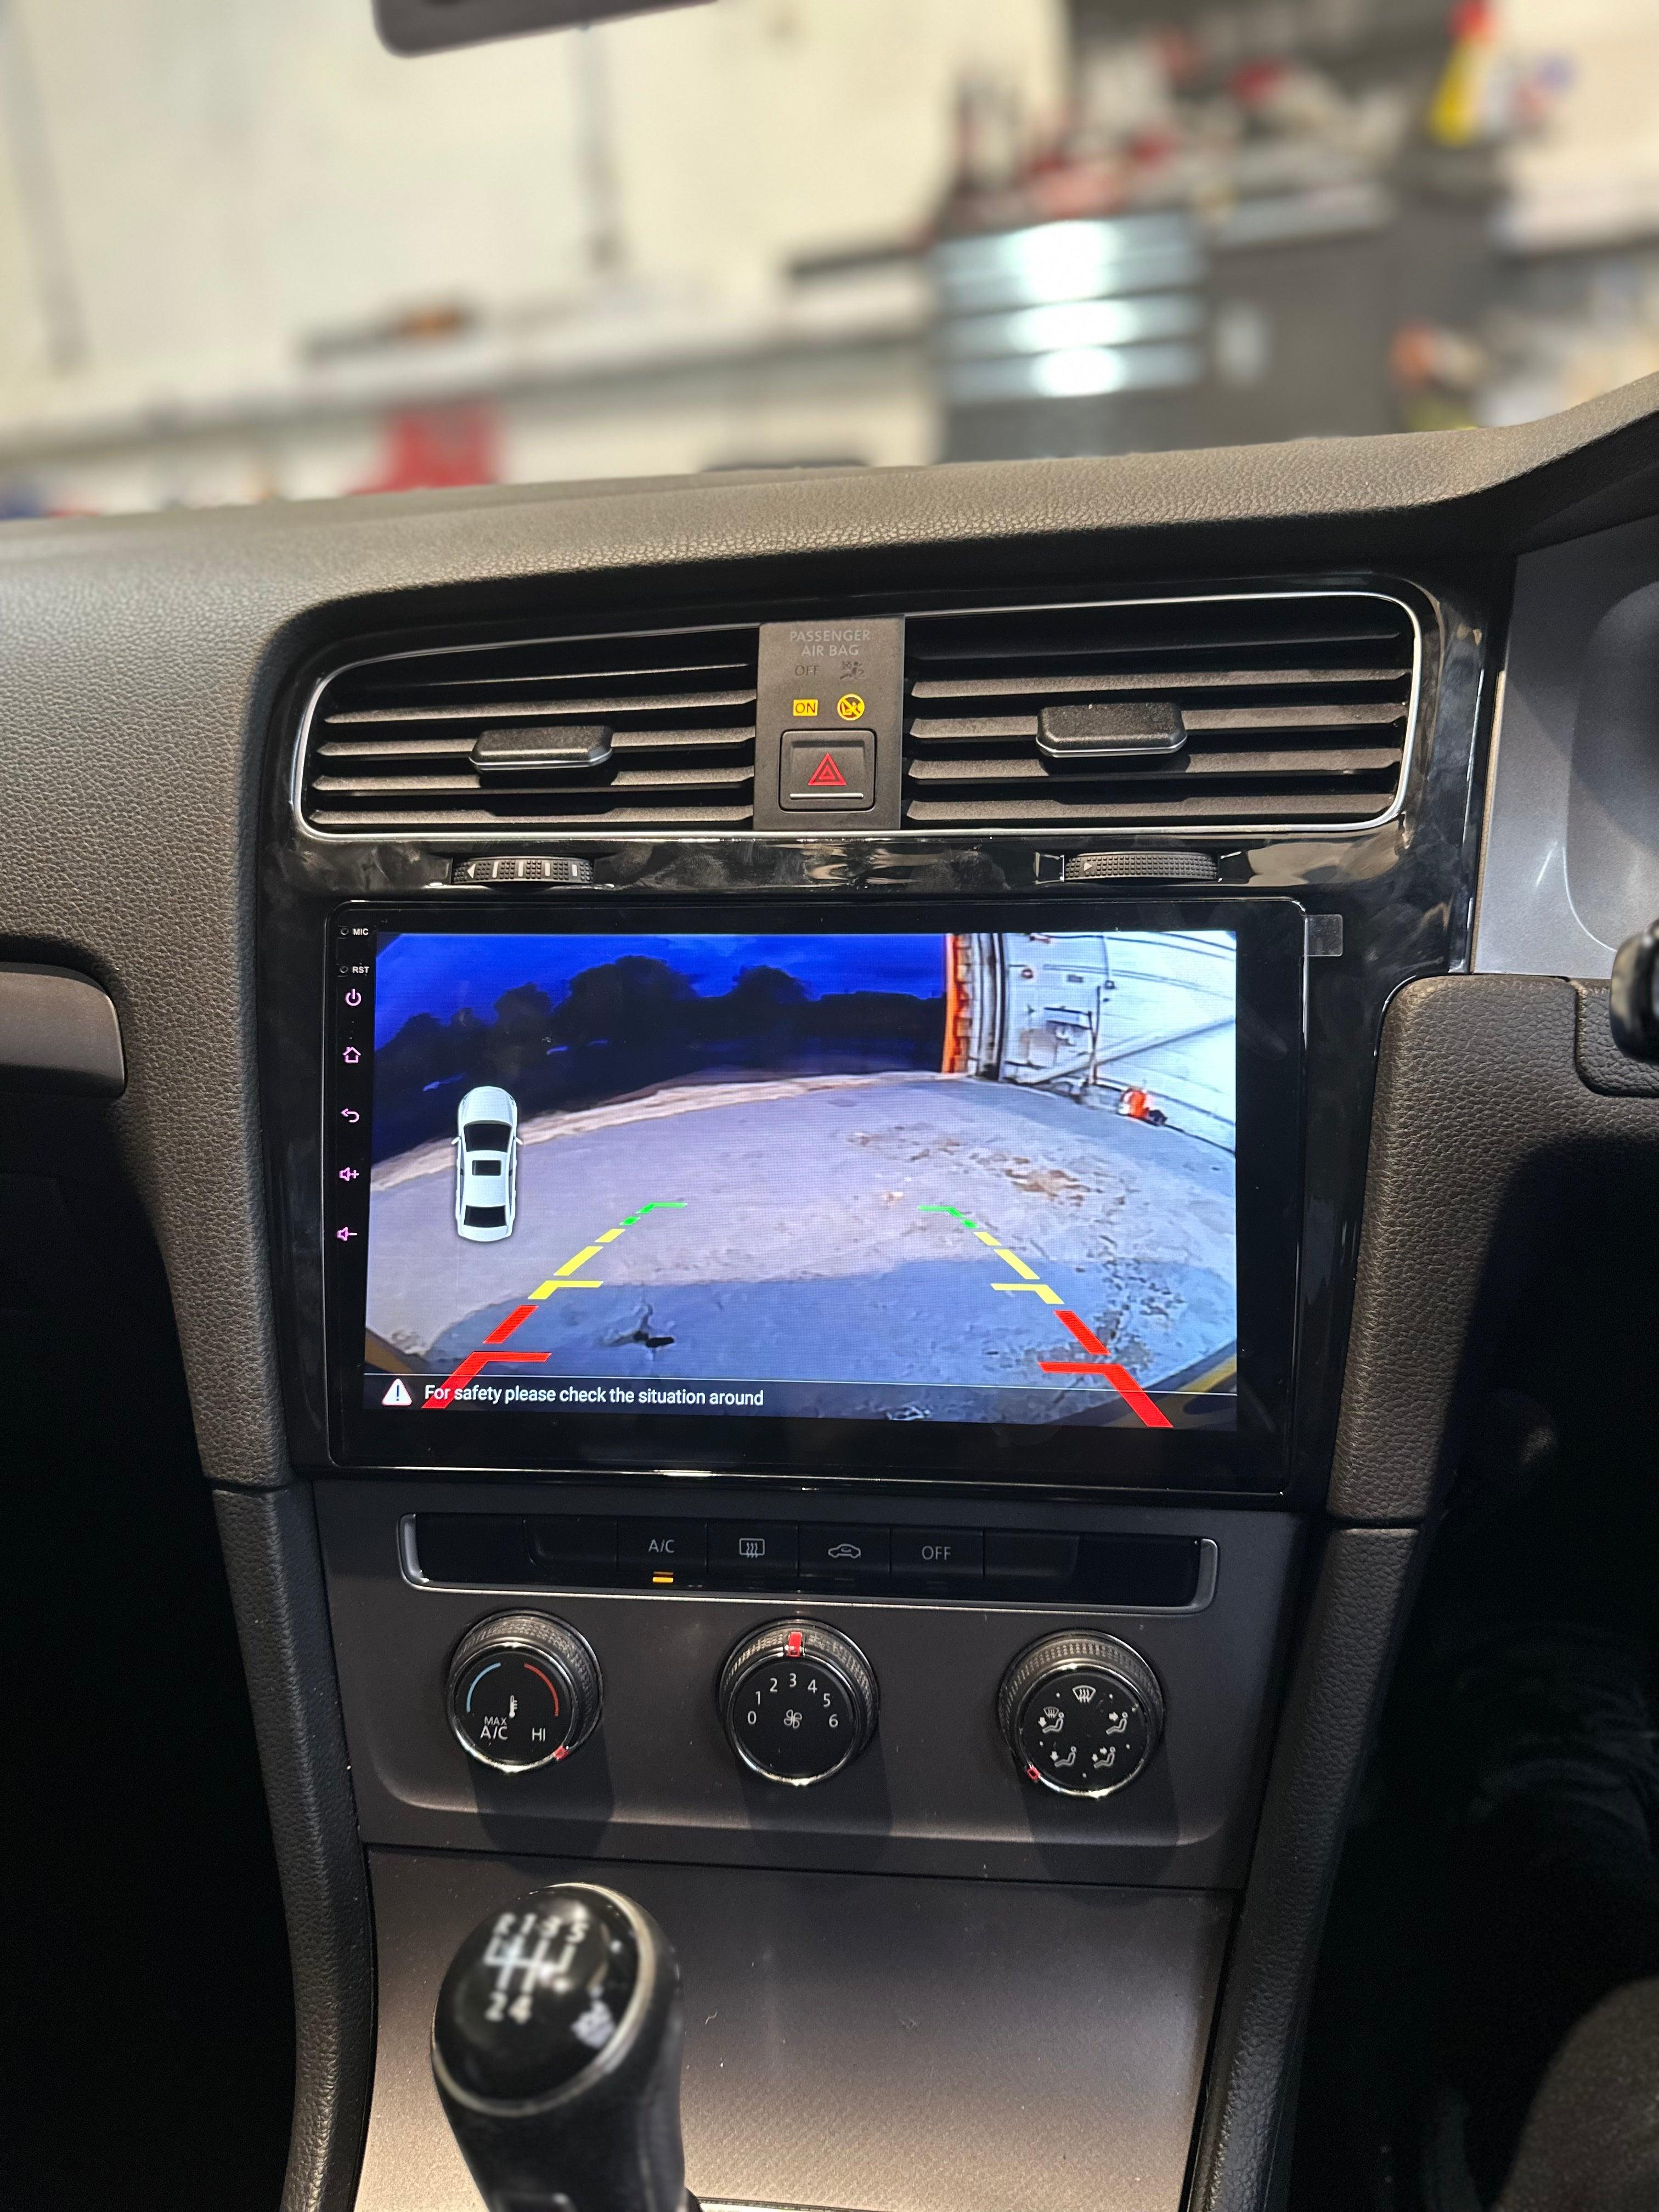 VW Golf Mk7 (2012 - 2016) 10" Android Screen Upgrade and Wireless Apple CarPlay 4G RHD - AUTOSTYLE UK